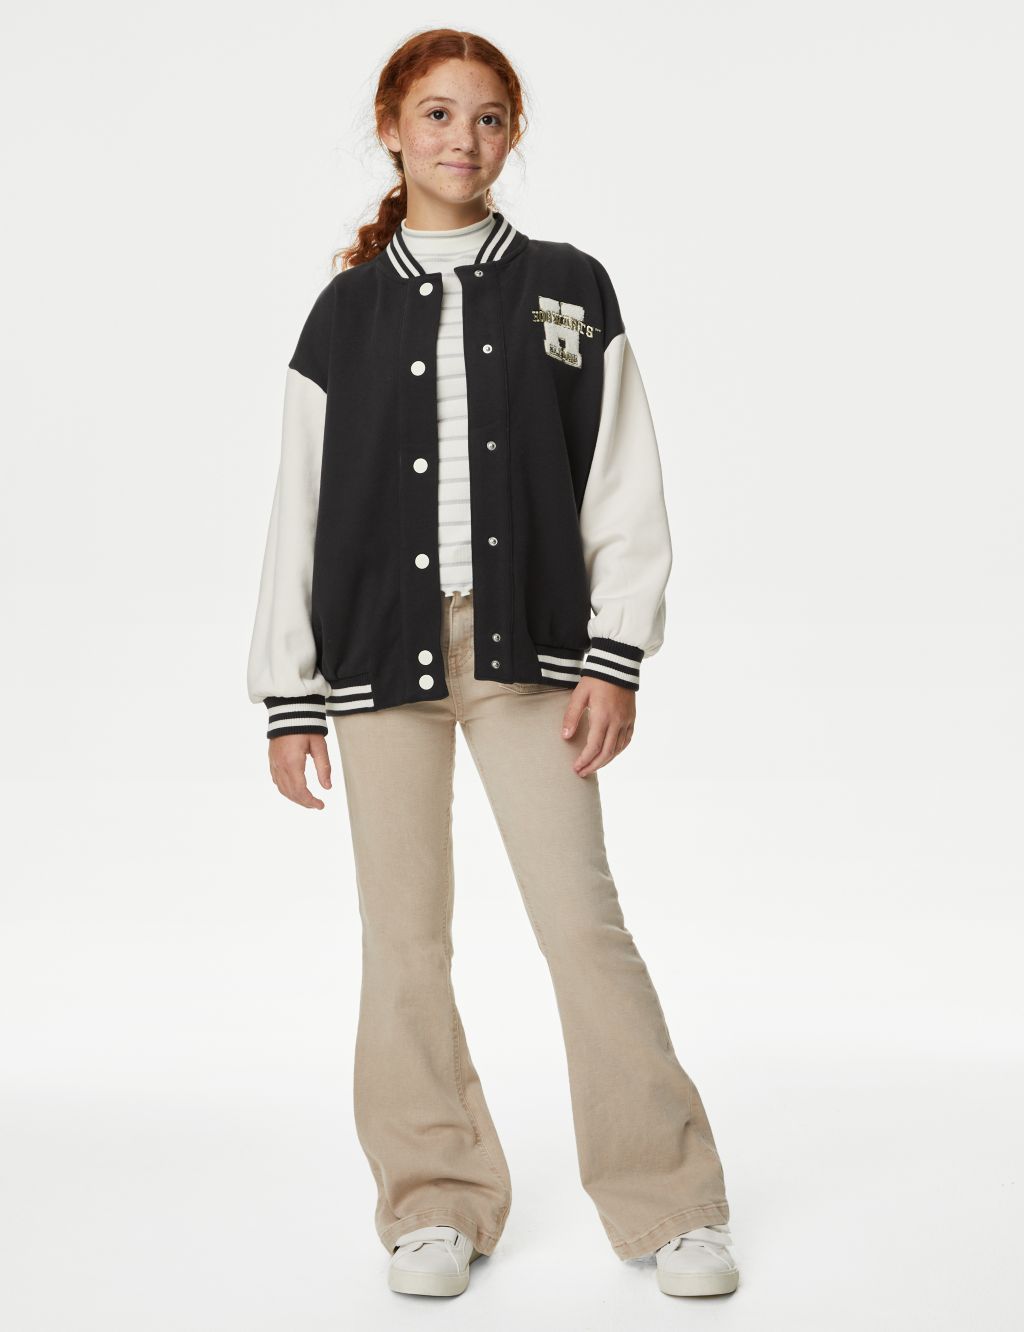 Green And White Louis Vuitton Varsity Jacket - Eve Suiting